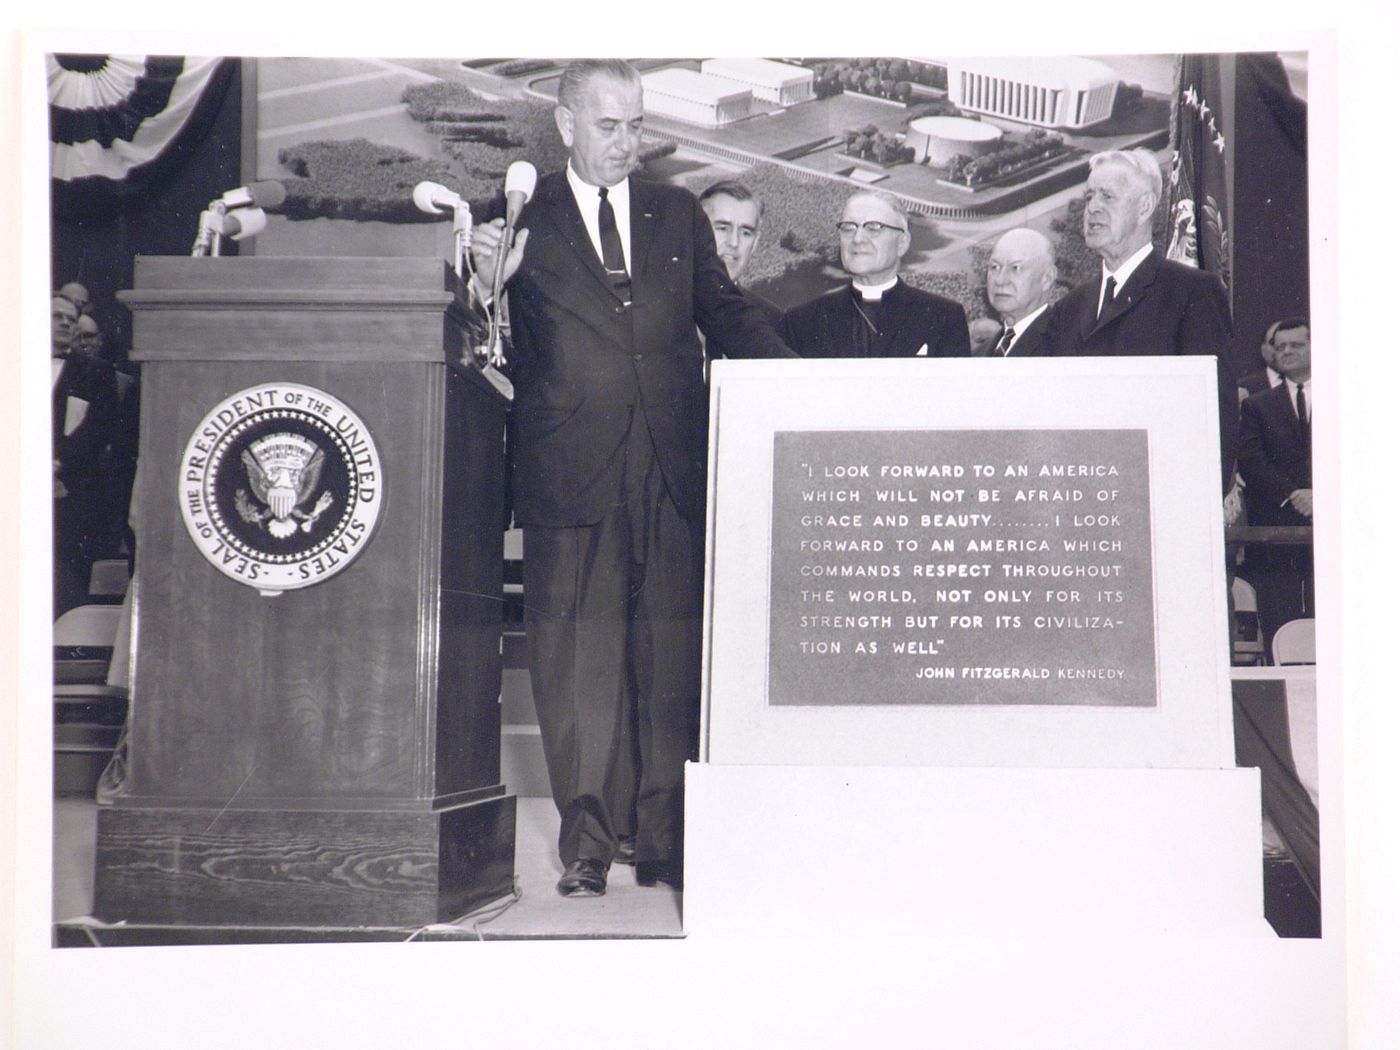 View of the dedication ceremony of the John F. Kennedy Educational, Civic and Cultural Center showing the memorial plaque with a quote by John F. Kennedy with President Lyndon B. Johnson and other men of state on the platform, Mineola, New York